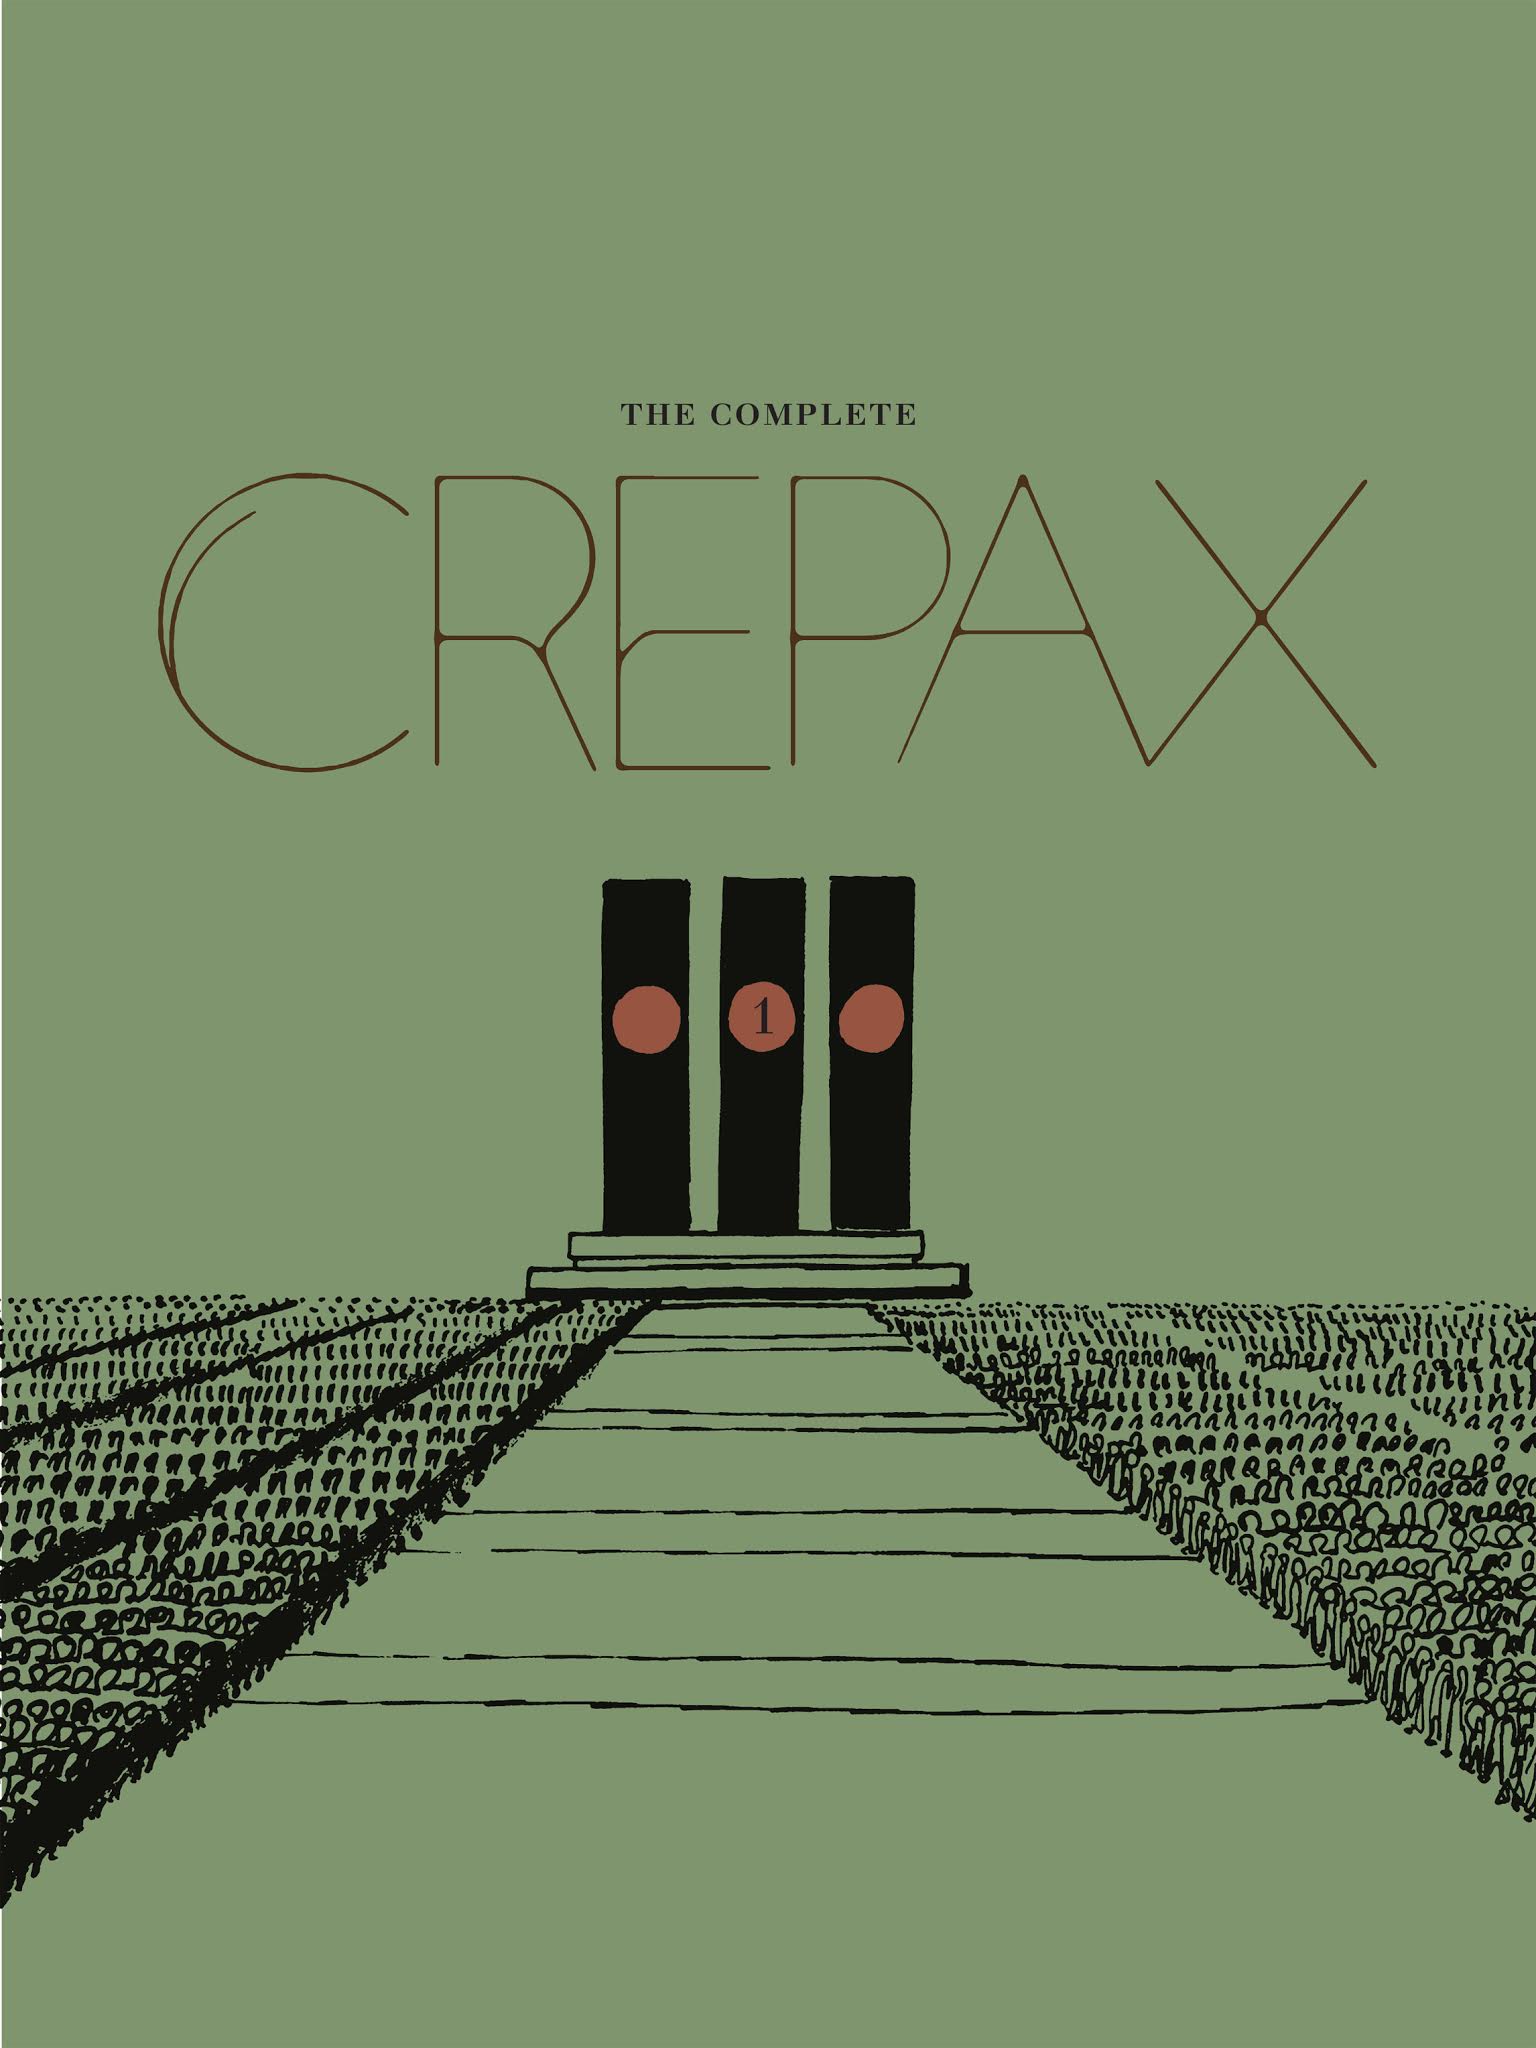 Read online The Complete Crepax comic -  Issue # TPB 1 - 2